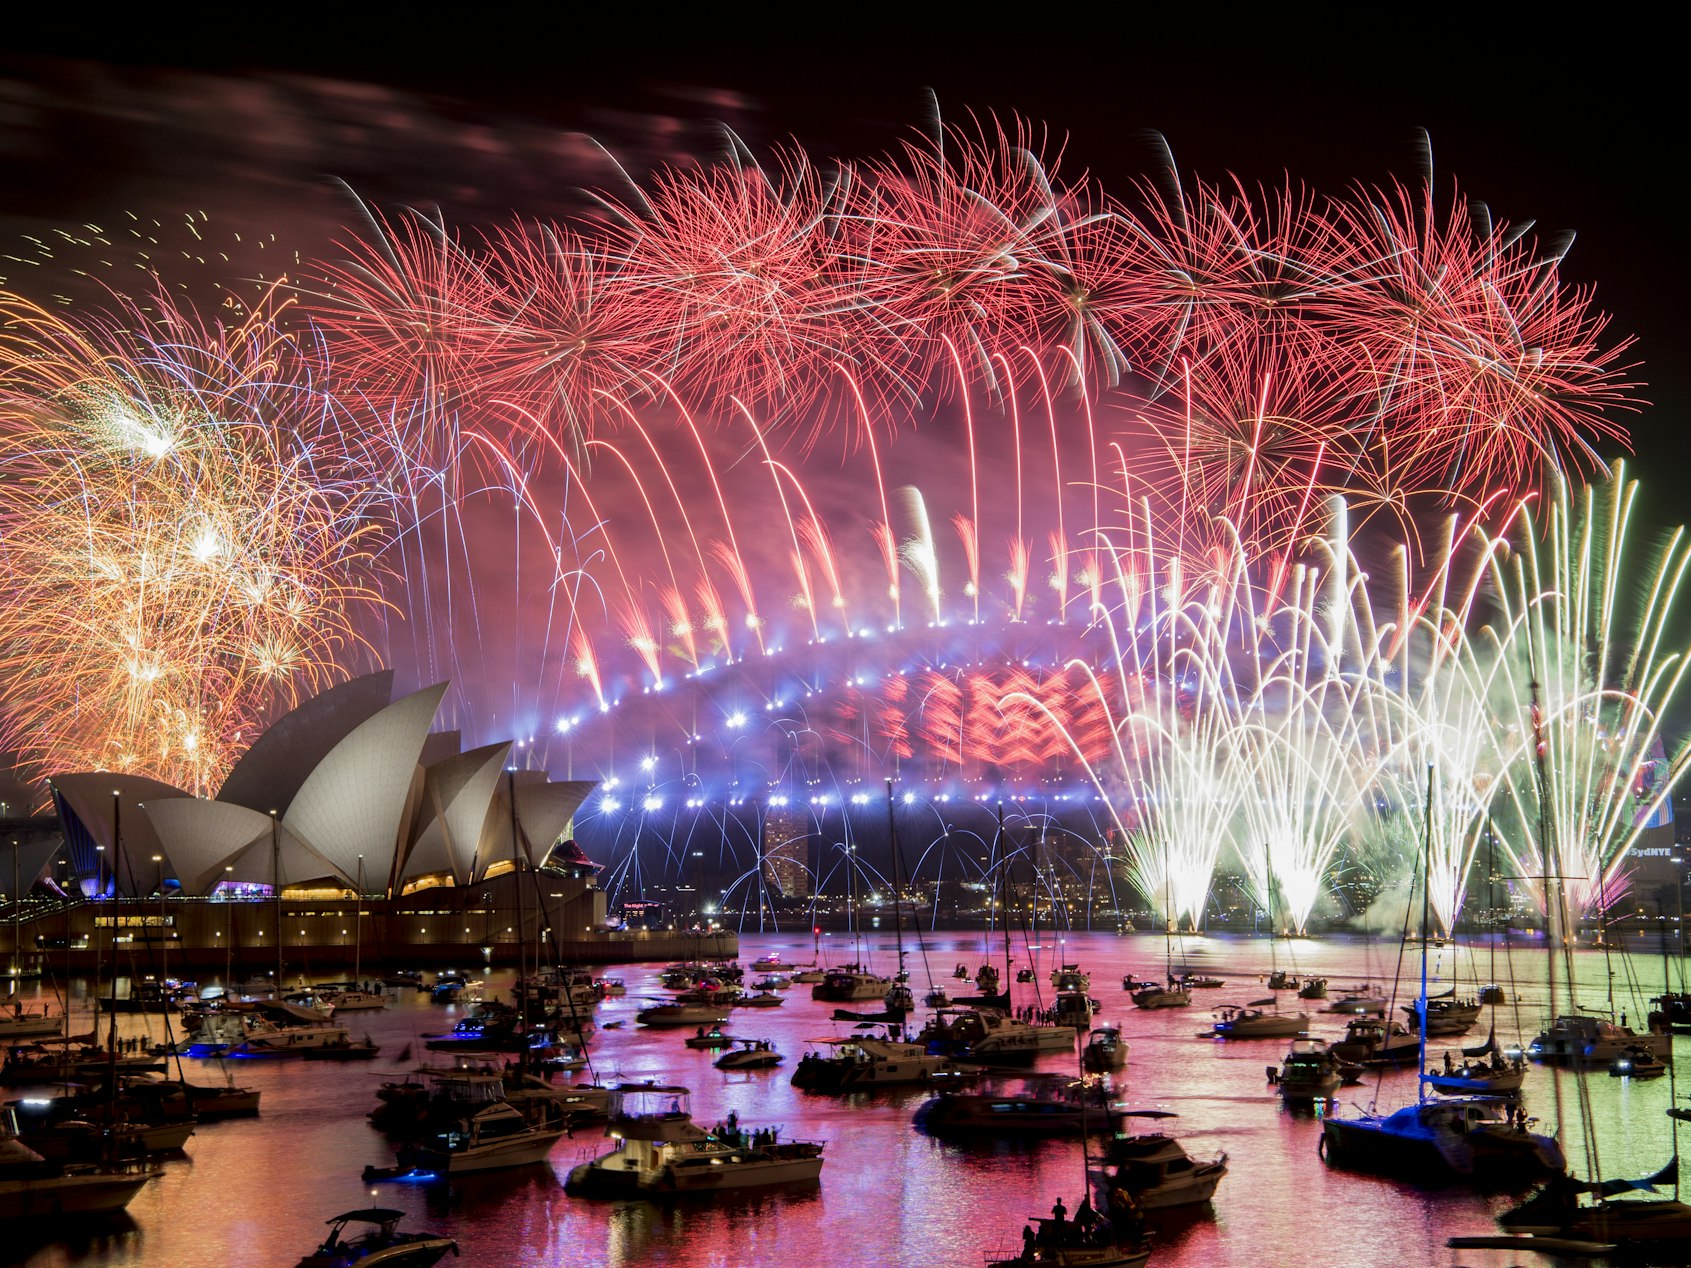 KUOW Threat Of Wildfires Not Enough To Cancel Sydney's New Year's Eve